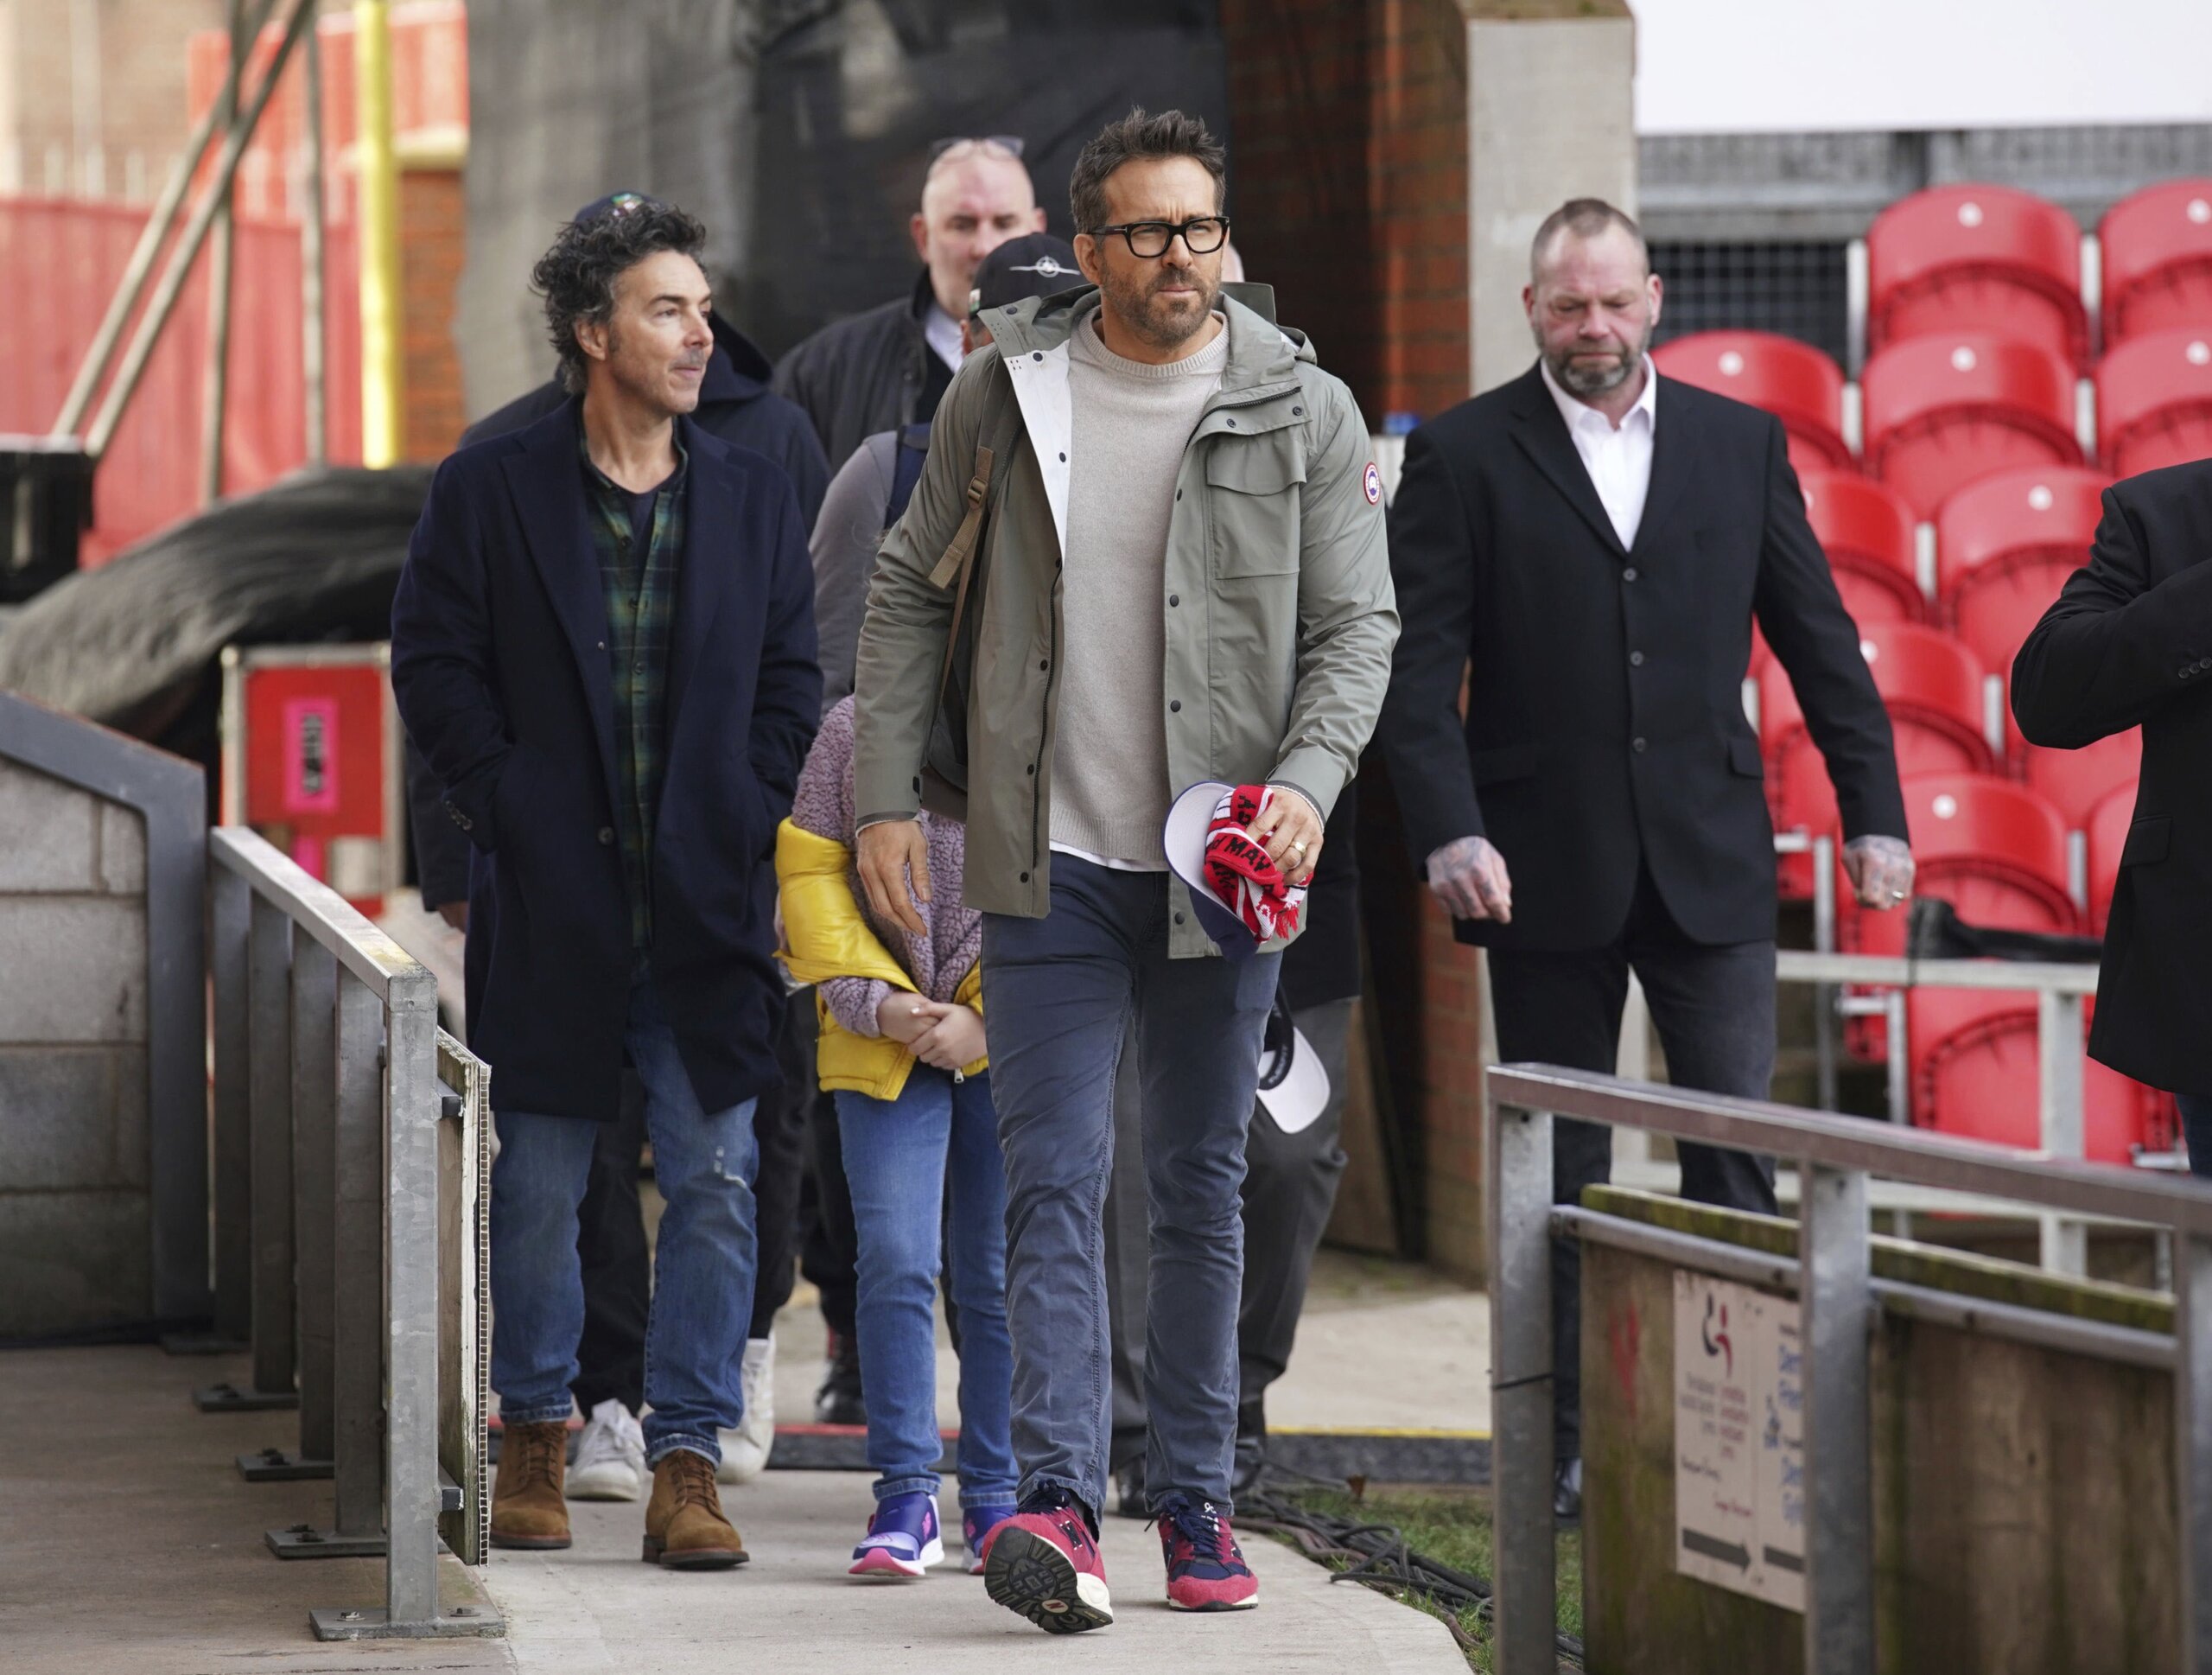 Ryan Reynolds goes through range of emotions in FA Cup match